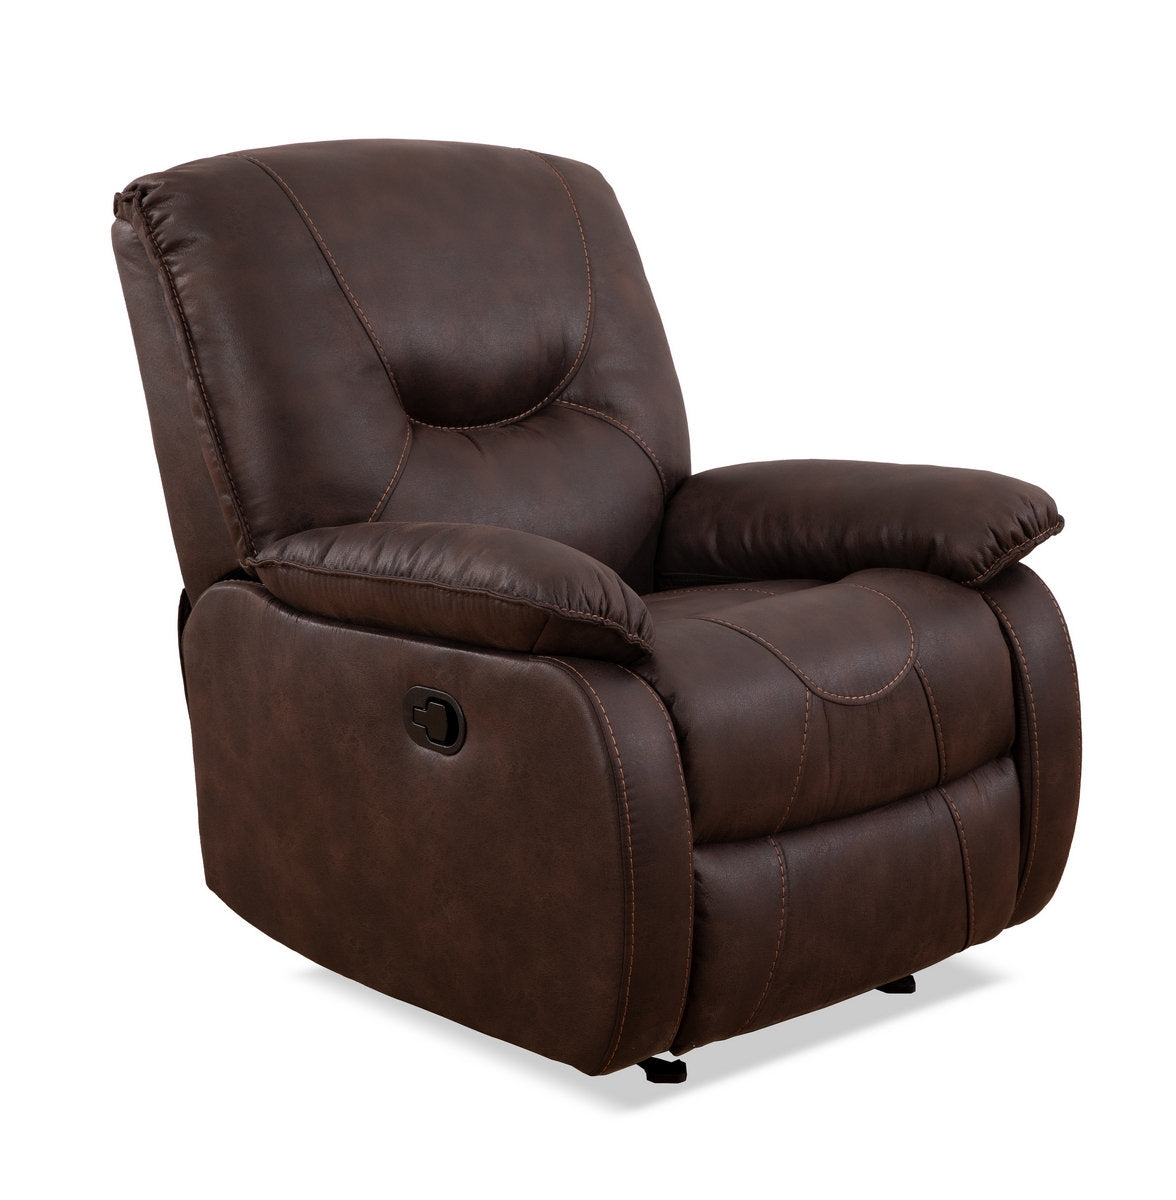 Brown Elephant Skin Fabric Recliner Chair with Solid Hardwood Frame